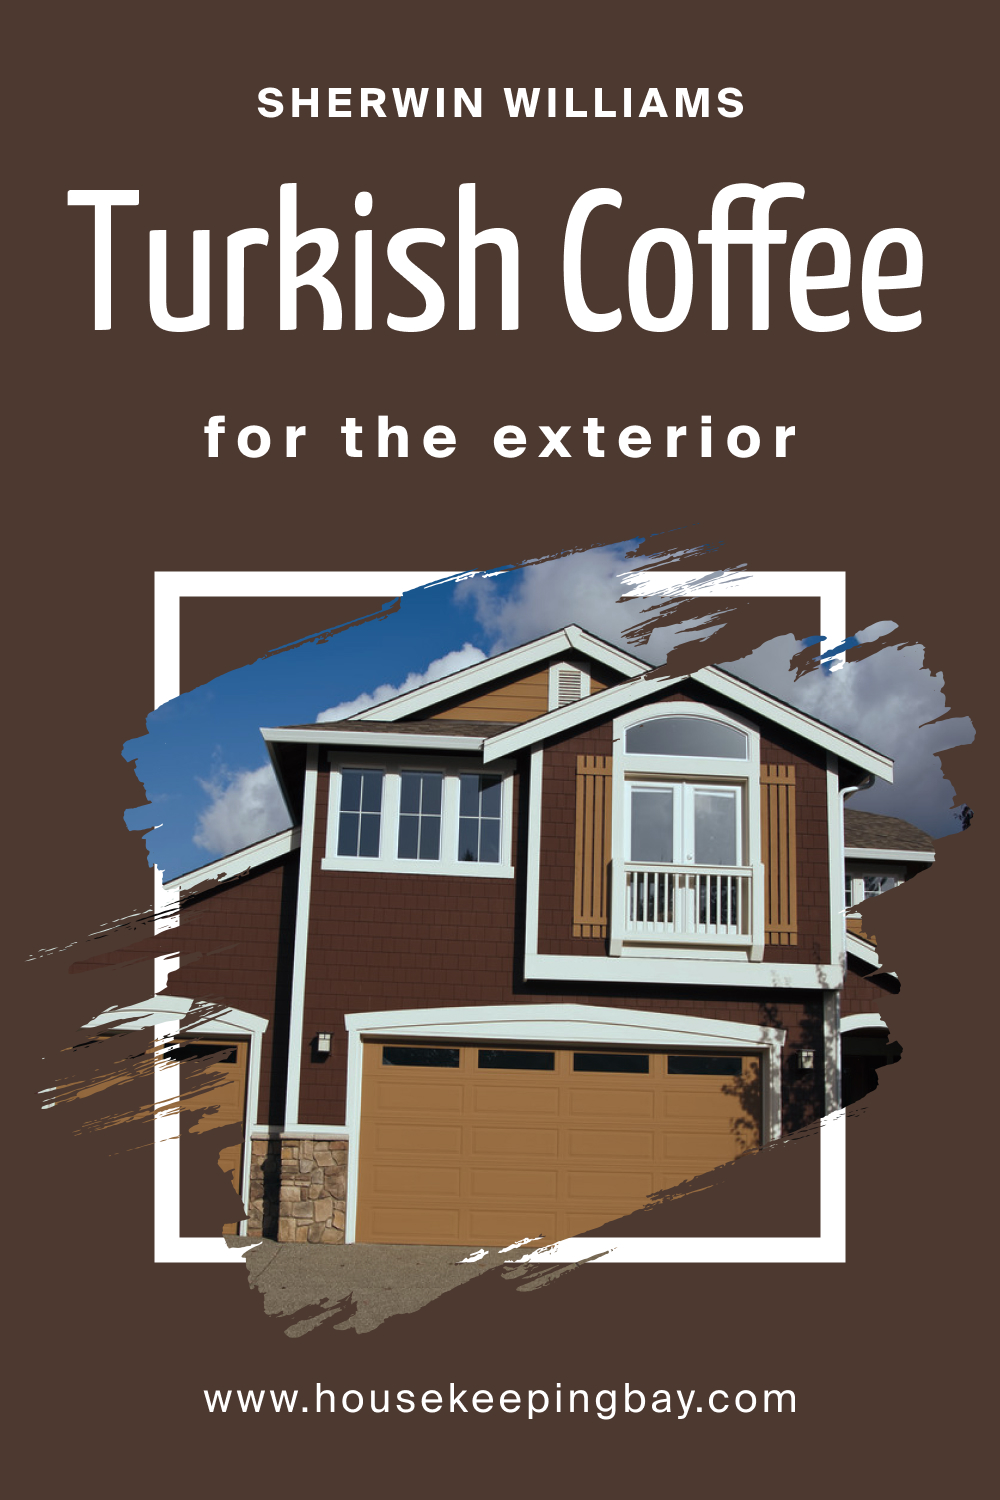 Sherwin Williams. SW 6076 Turkish Coffee For the exterior